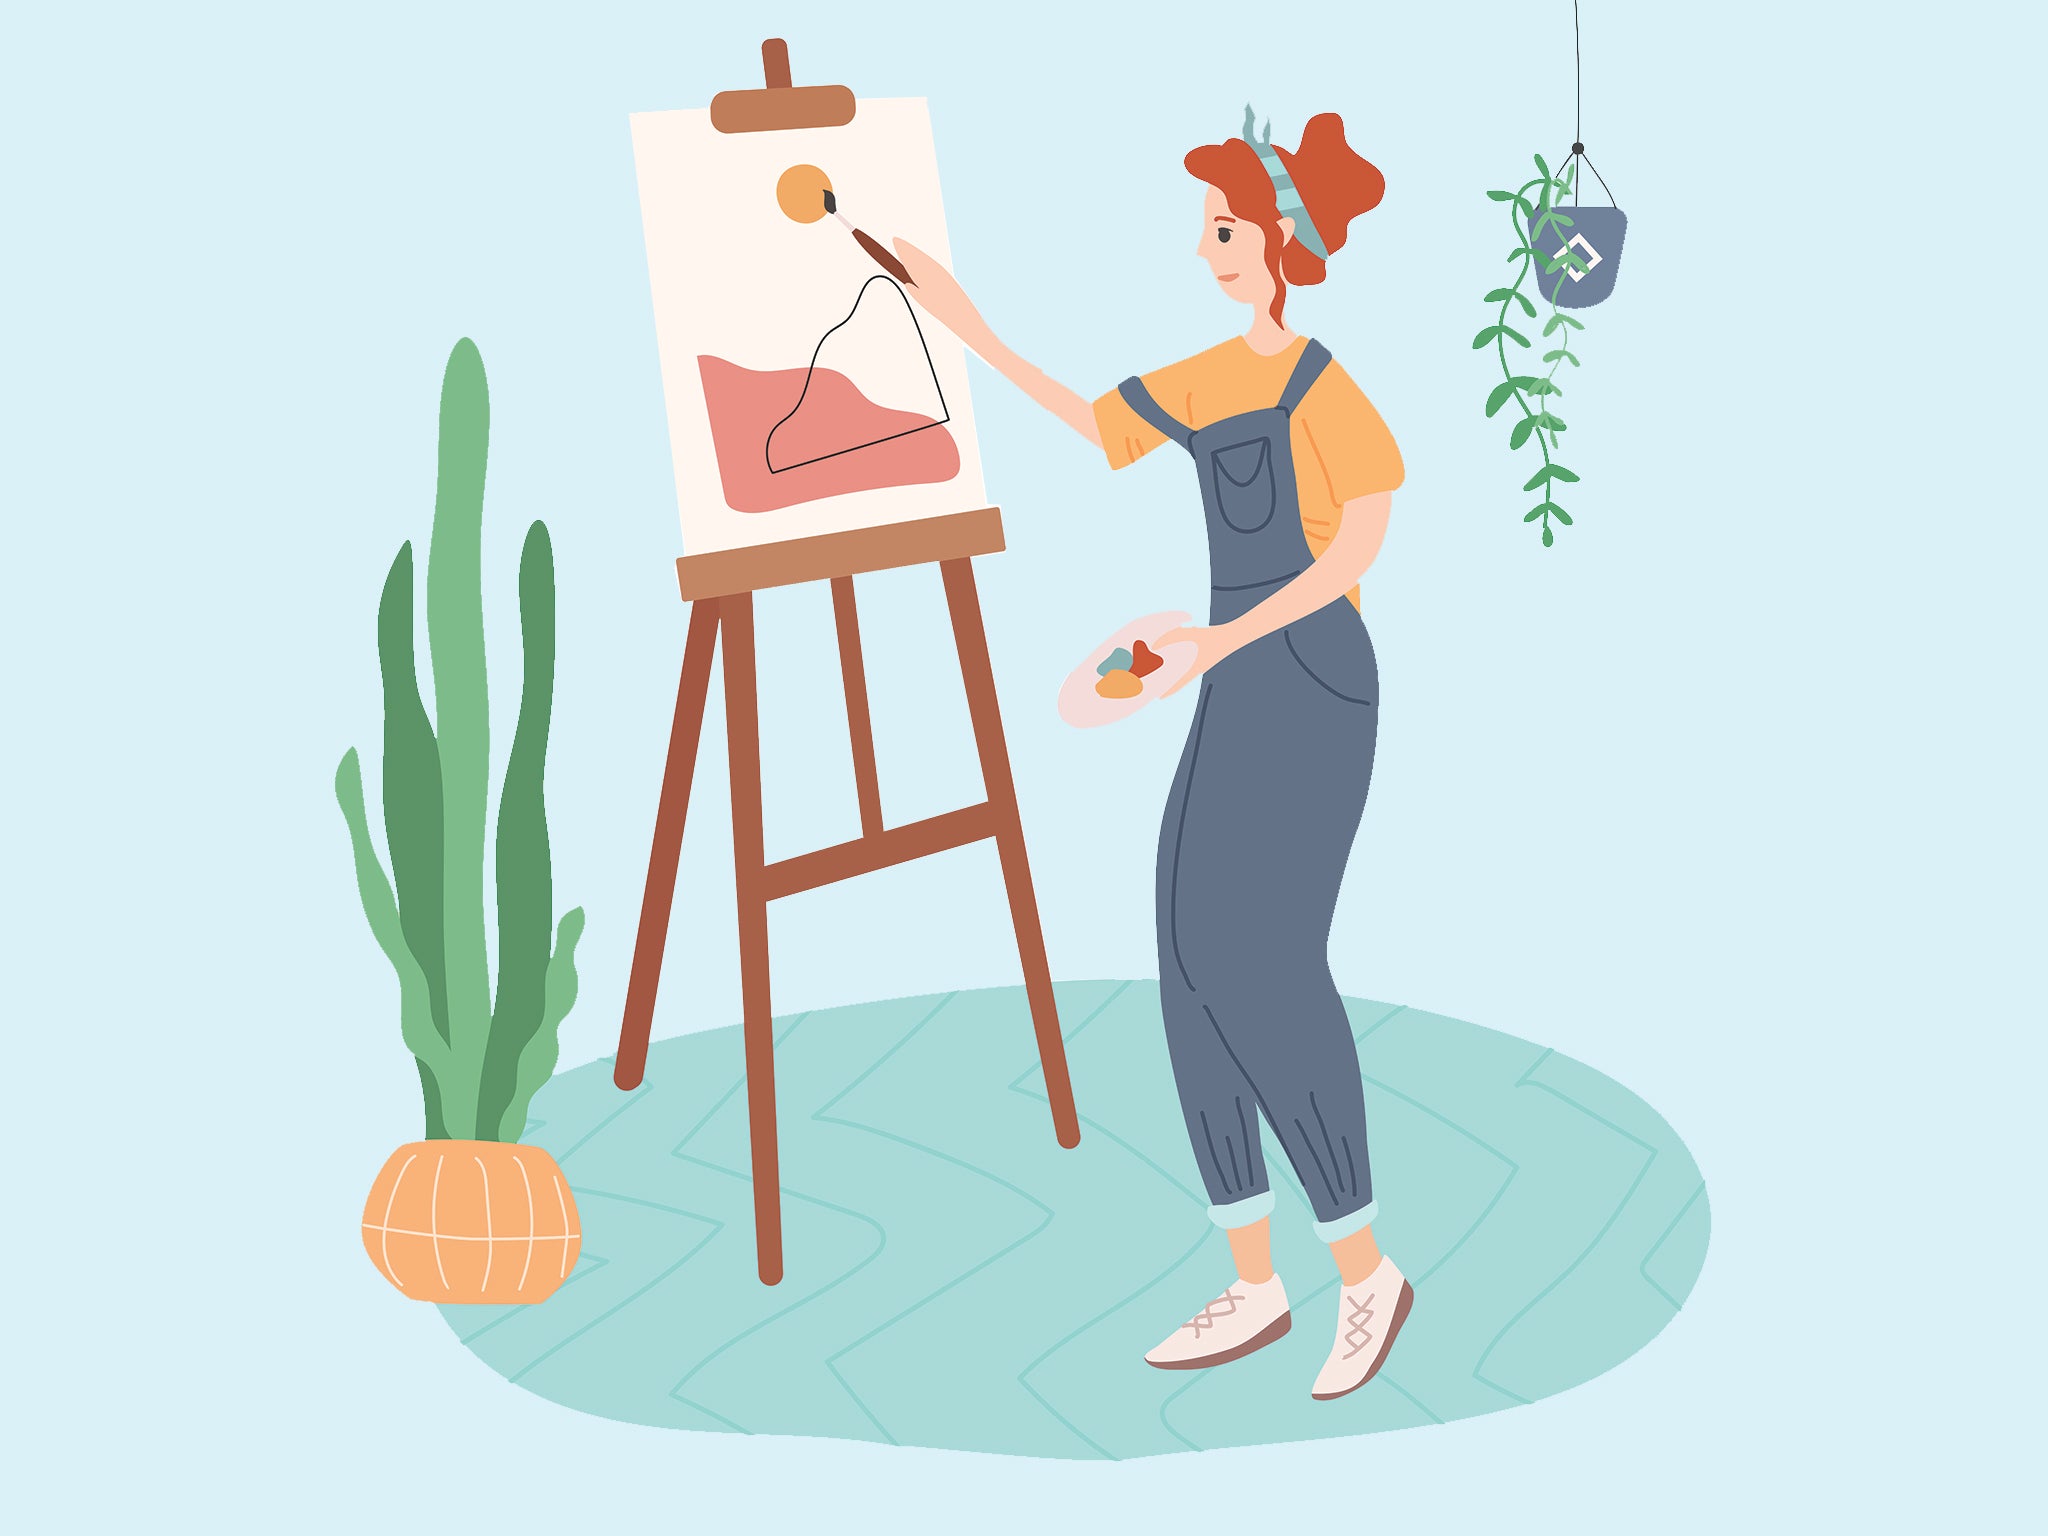 Art for beginners How to draw, paint and more, according to artists The Independent